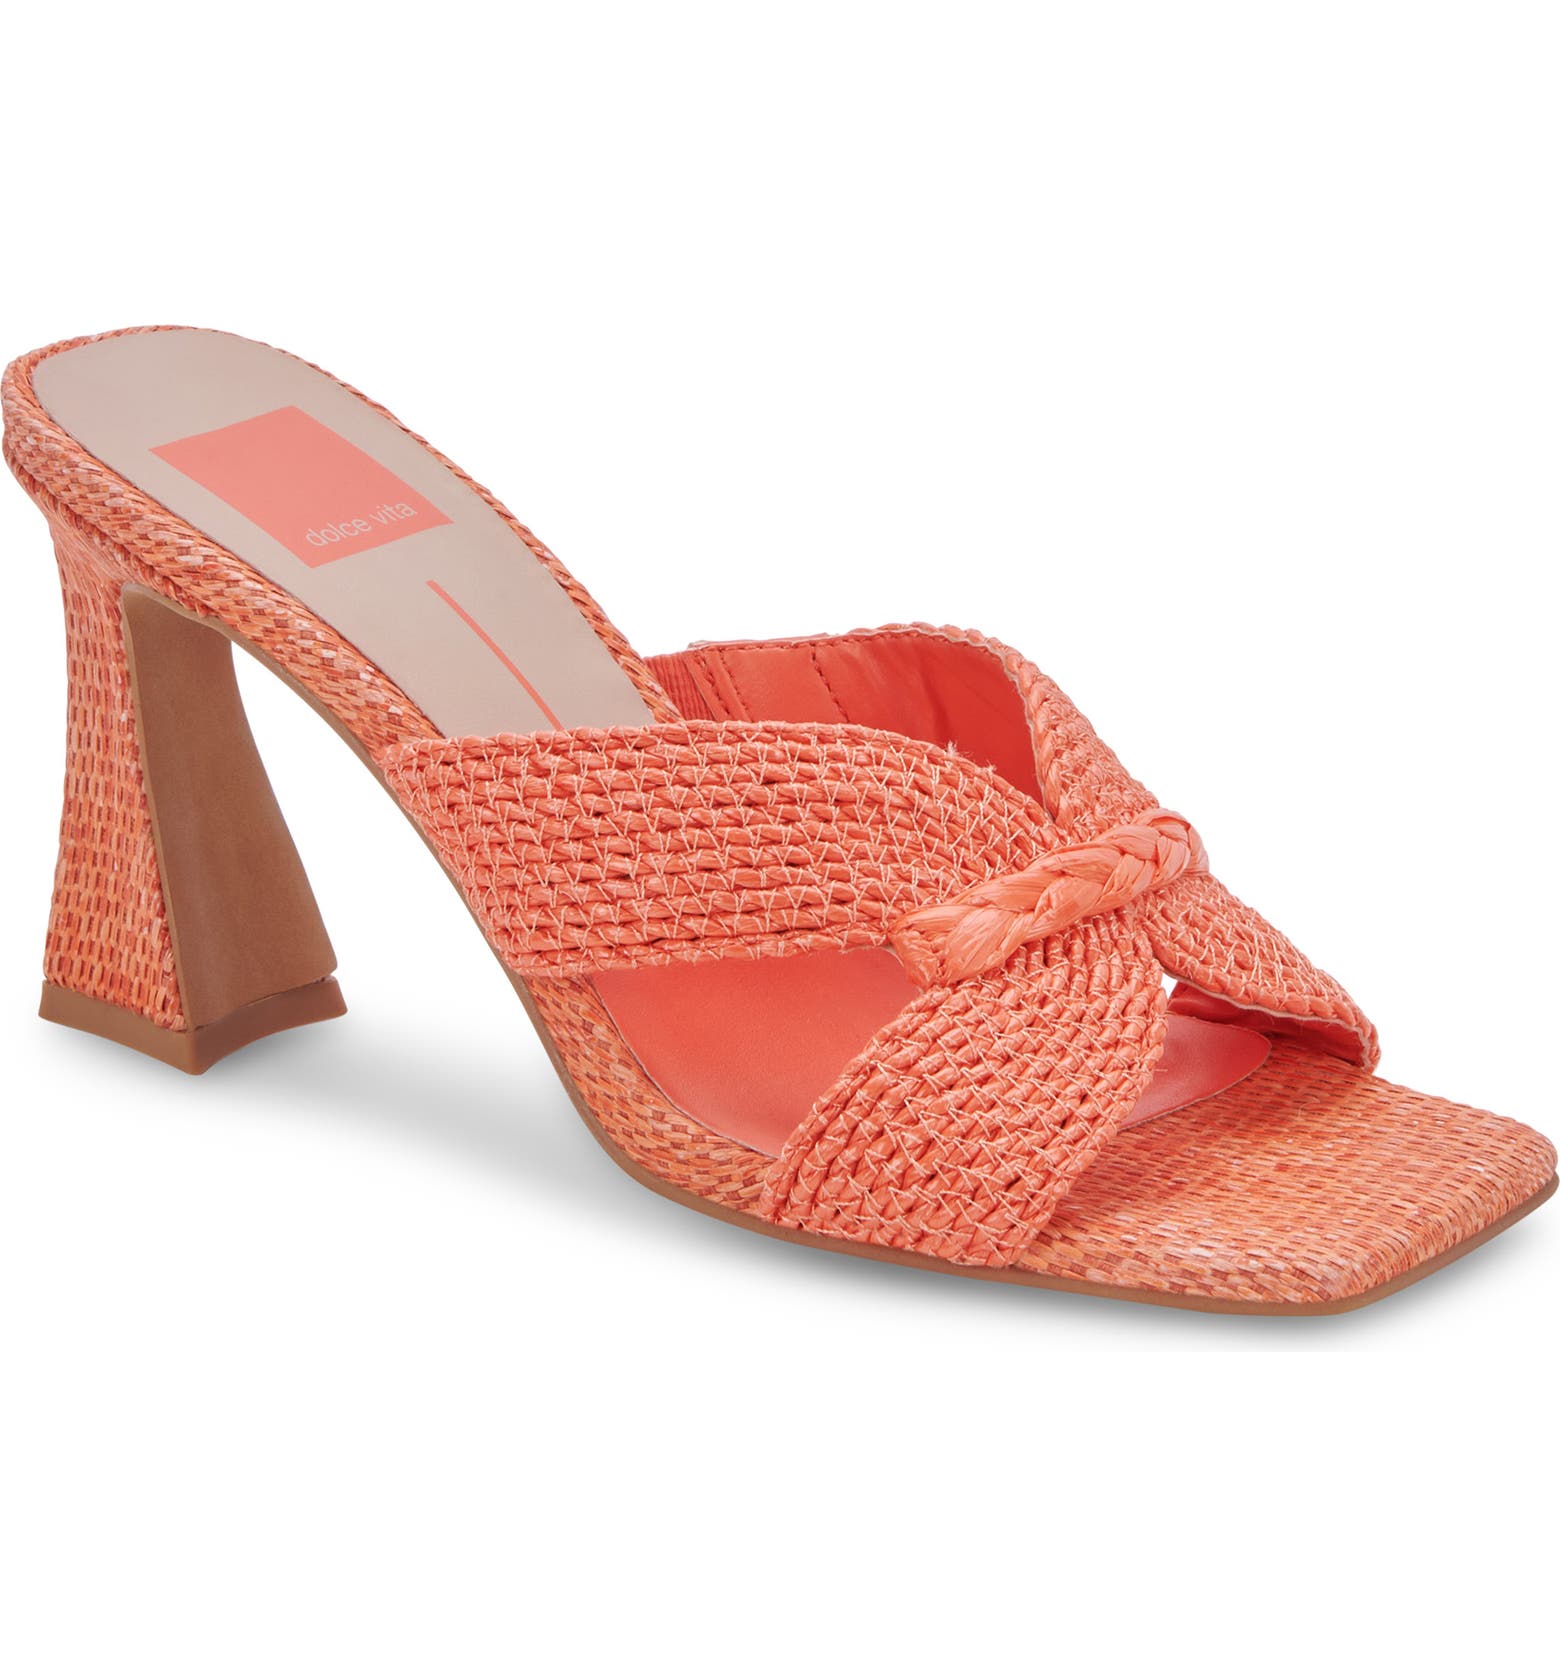 Coral high heeled mules